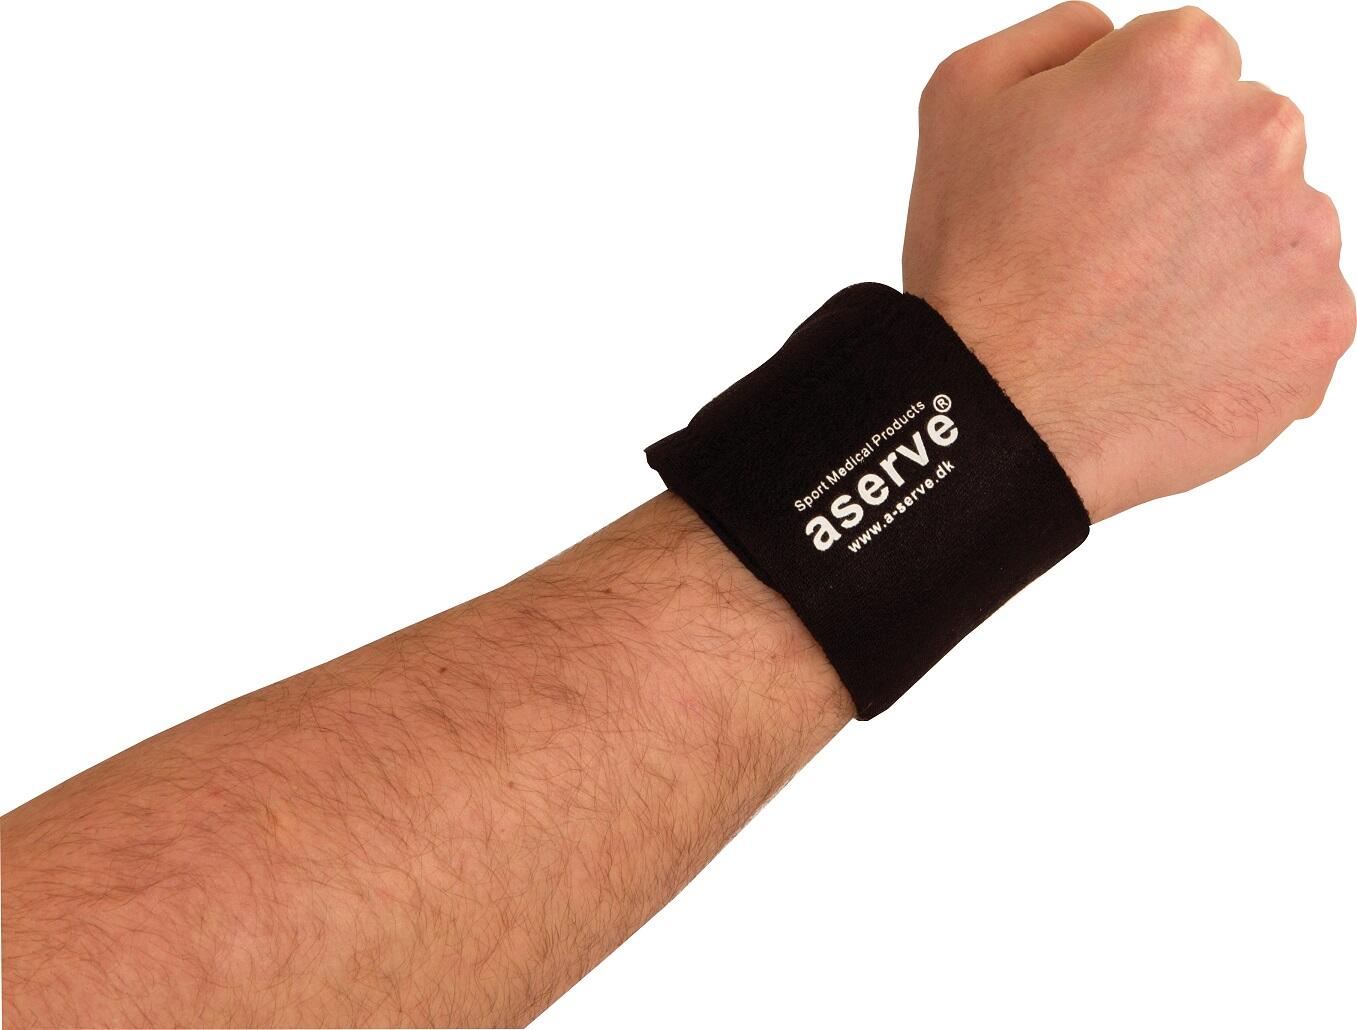 Wrist Support Aserve